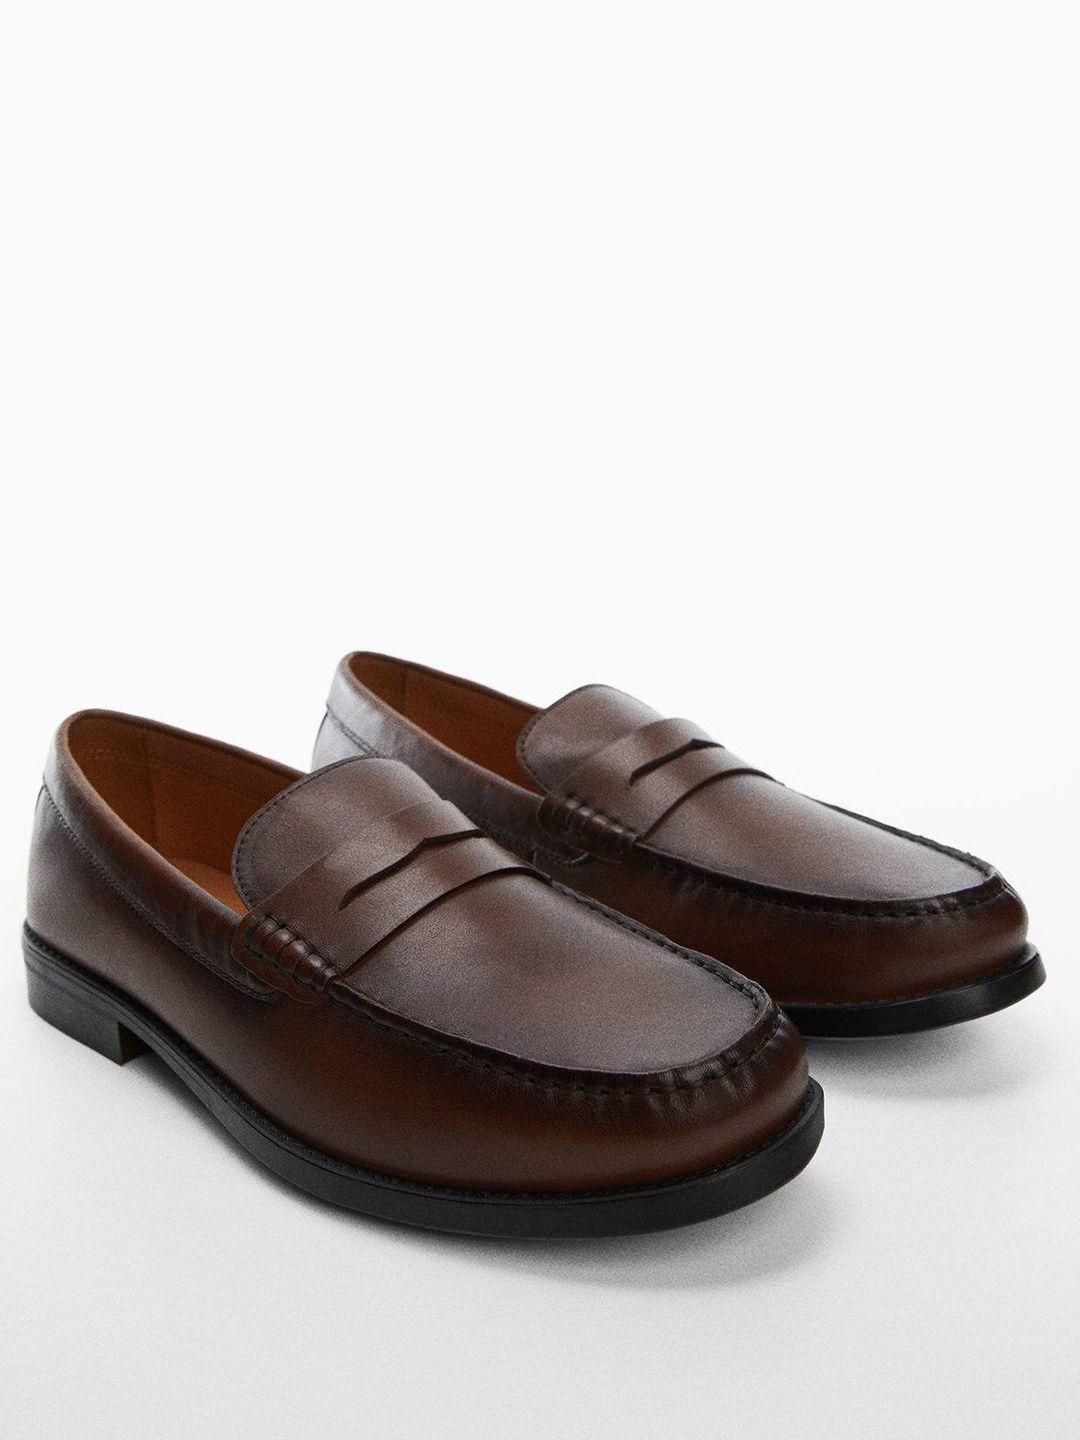 mango-man-sustainable-leather-penny-loafers